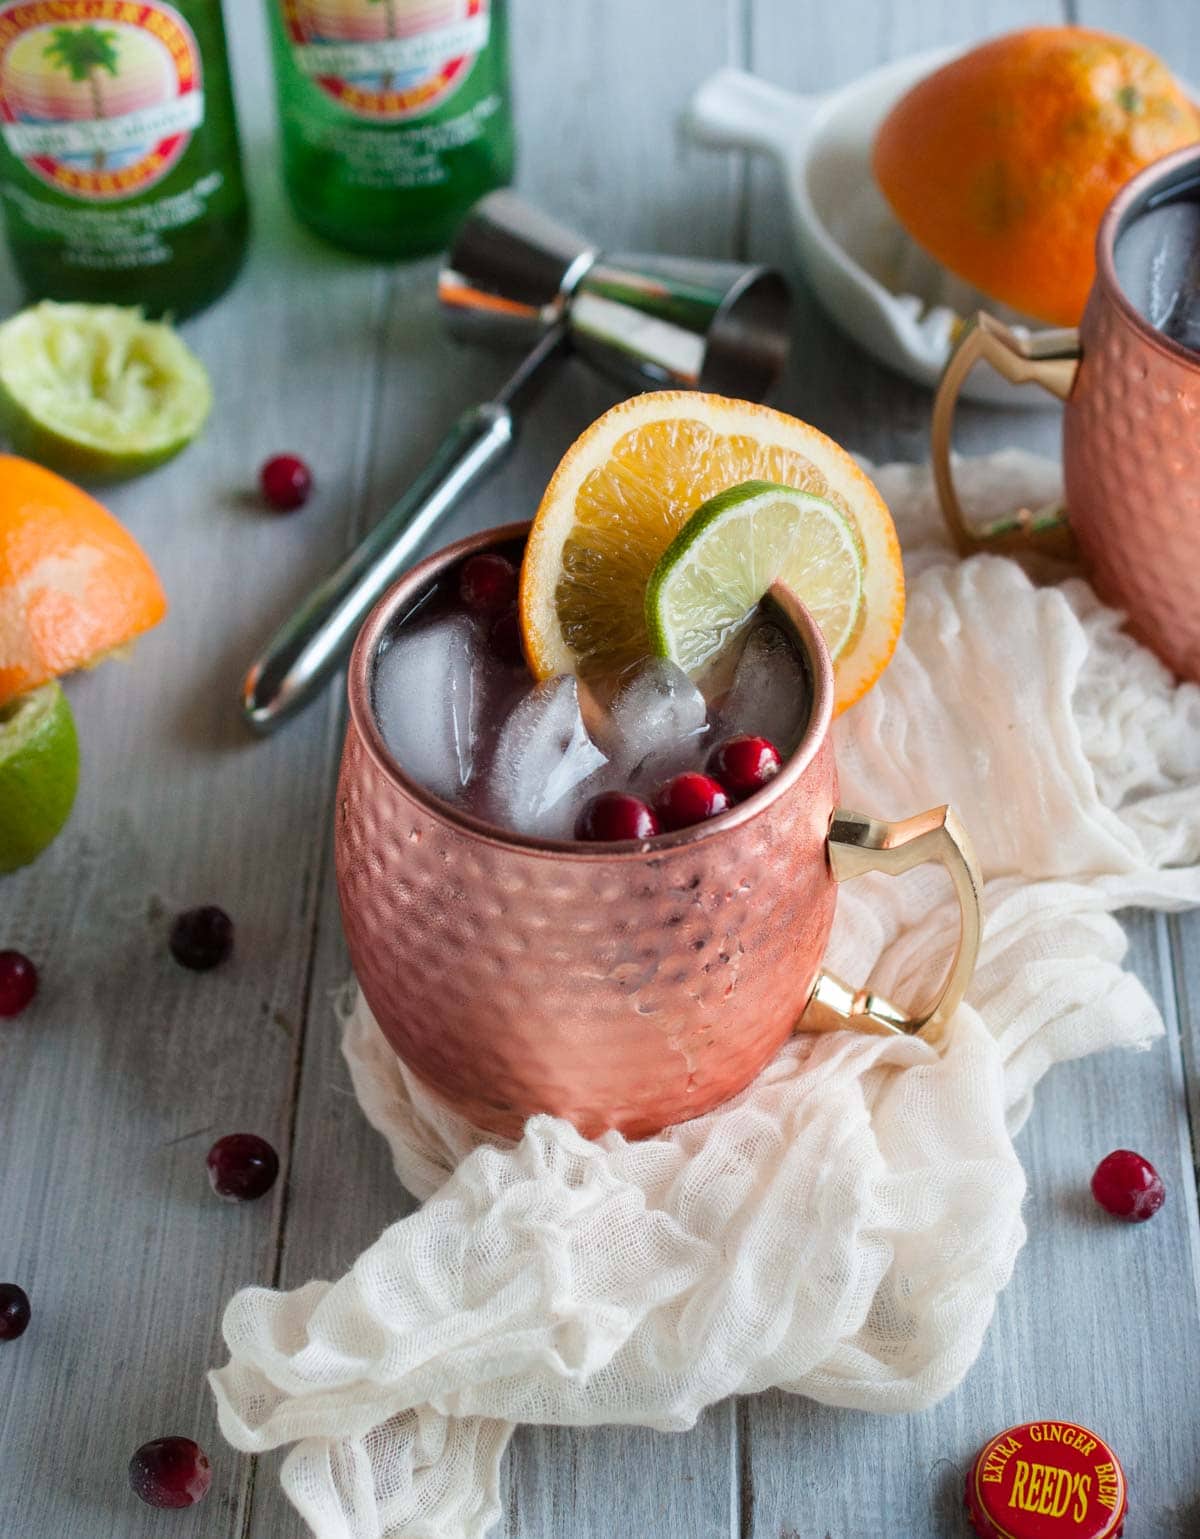 Cranberry Moscow mule recipe made with zesty orange, zippy ginger beer, vodka, lime, and cranberry just might be the most refreshing drink on the planet. Try one today!